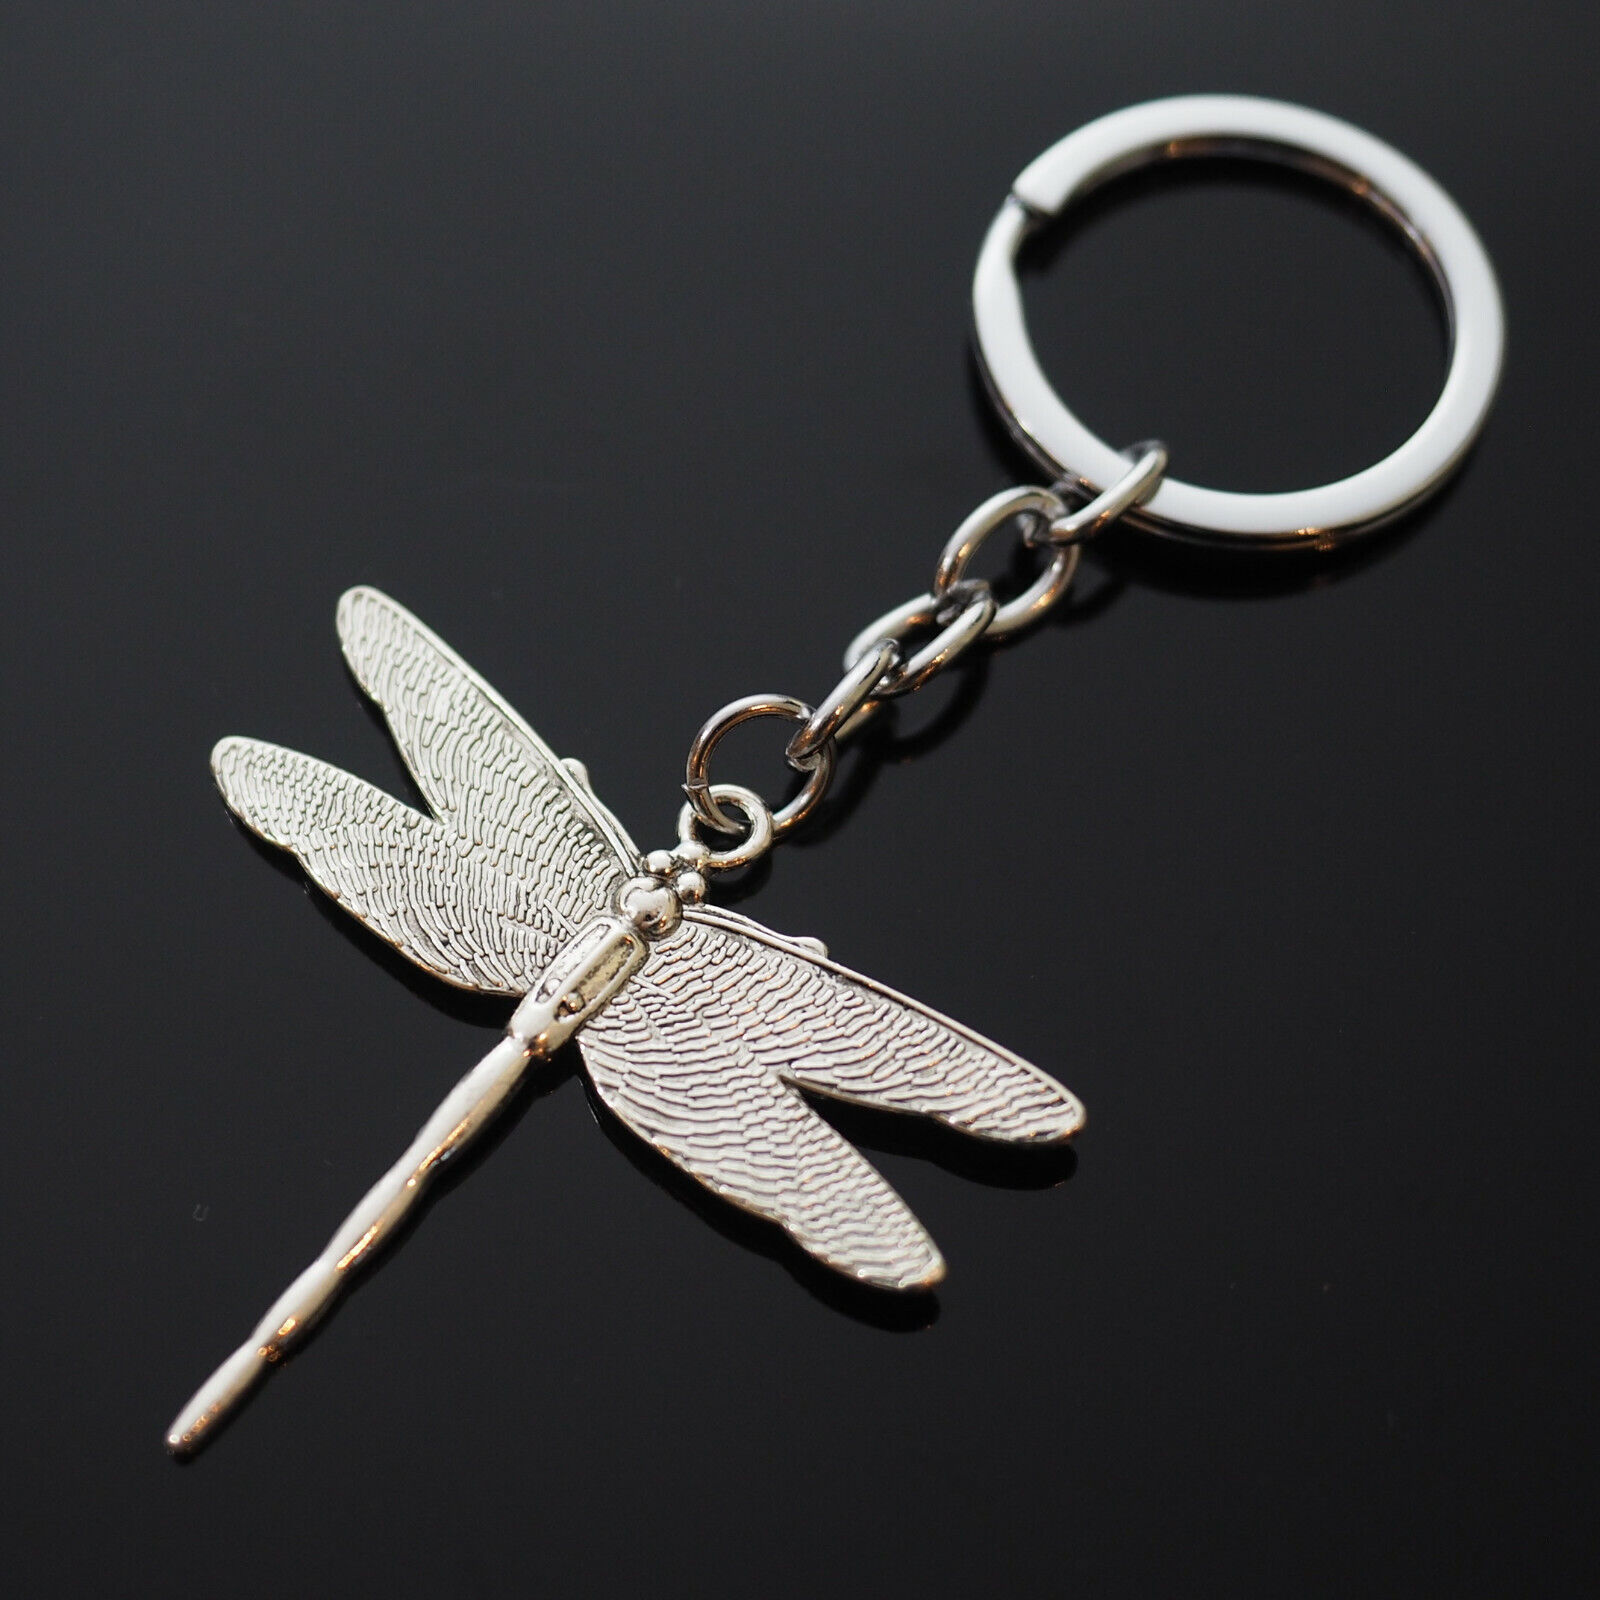 Dragonfly Key Chain Silver Pendant Charm Keychain Insect Lovers Gift 43x47mm